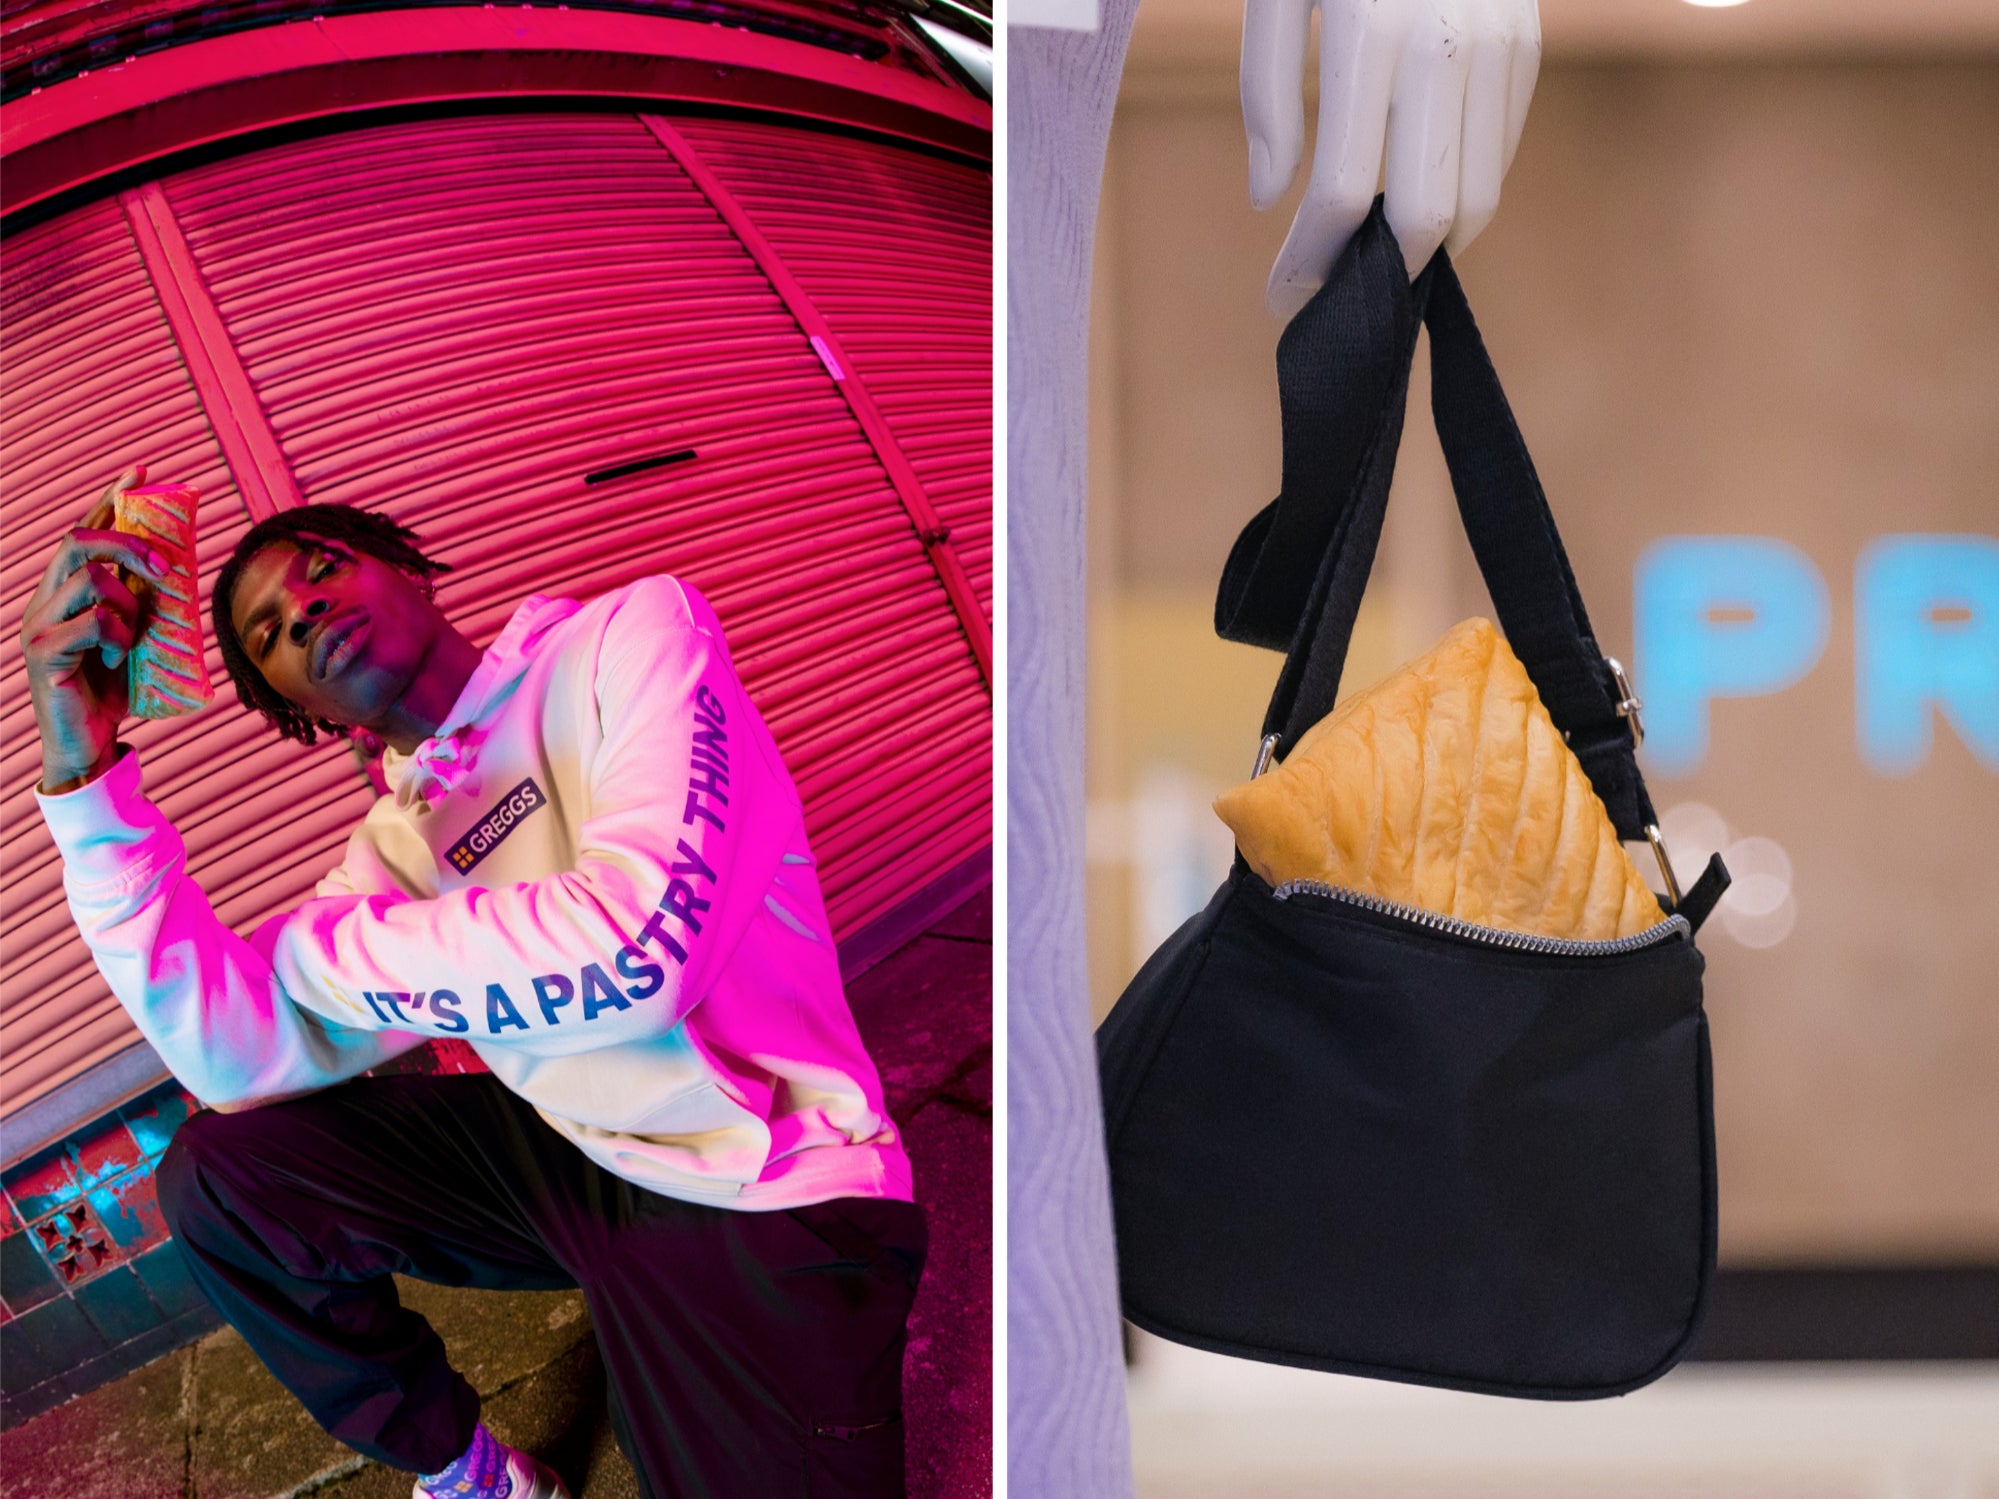 Greggs and Primark launch collection with pop-up in Manchester city centre  - with the help of Big Narstie - Manchester Evening News